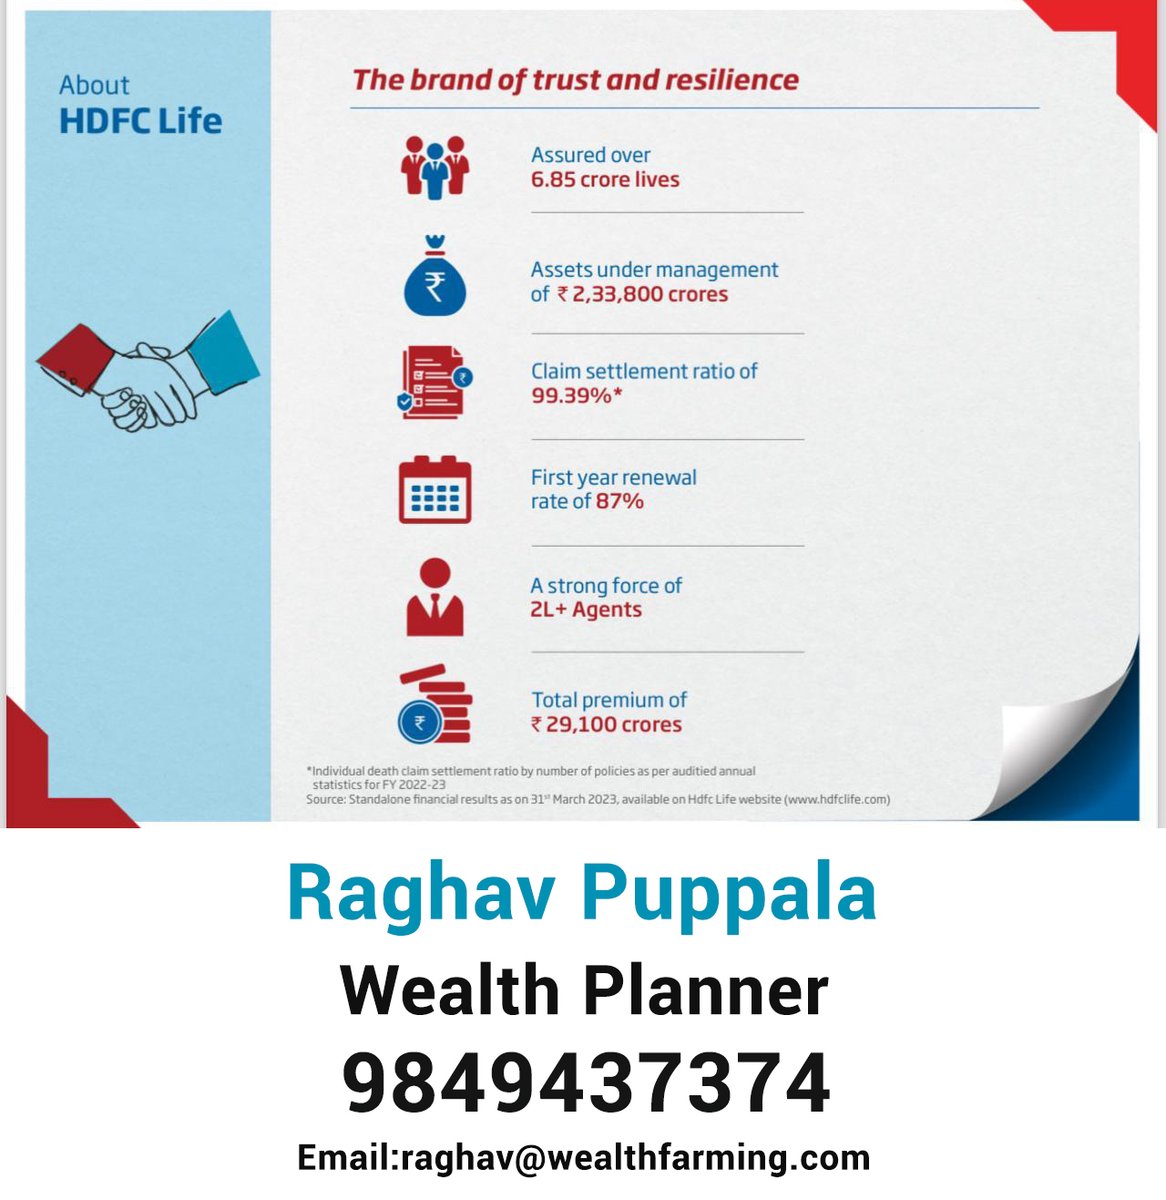 HDFC Life Insurance for more details call: 9849437374
#assured #claimsettlement #renewalrate #agents #premium #policies #hdfclifeinsurance #wealthplanner